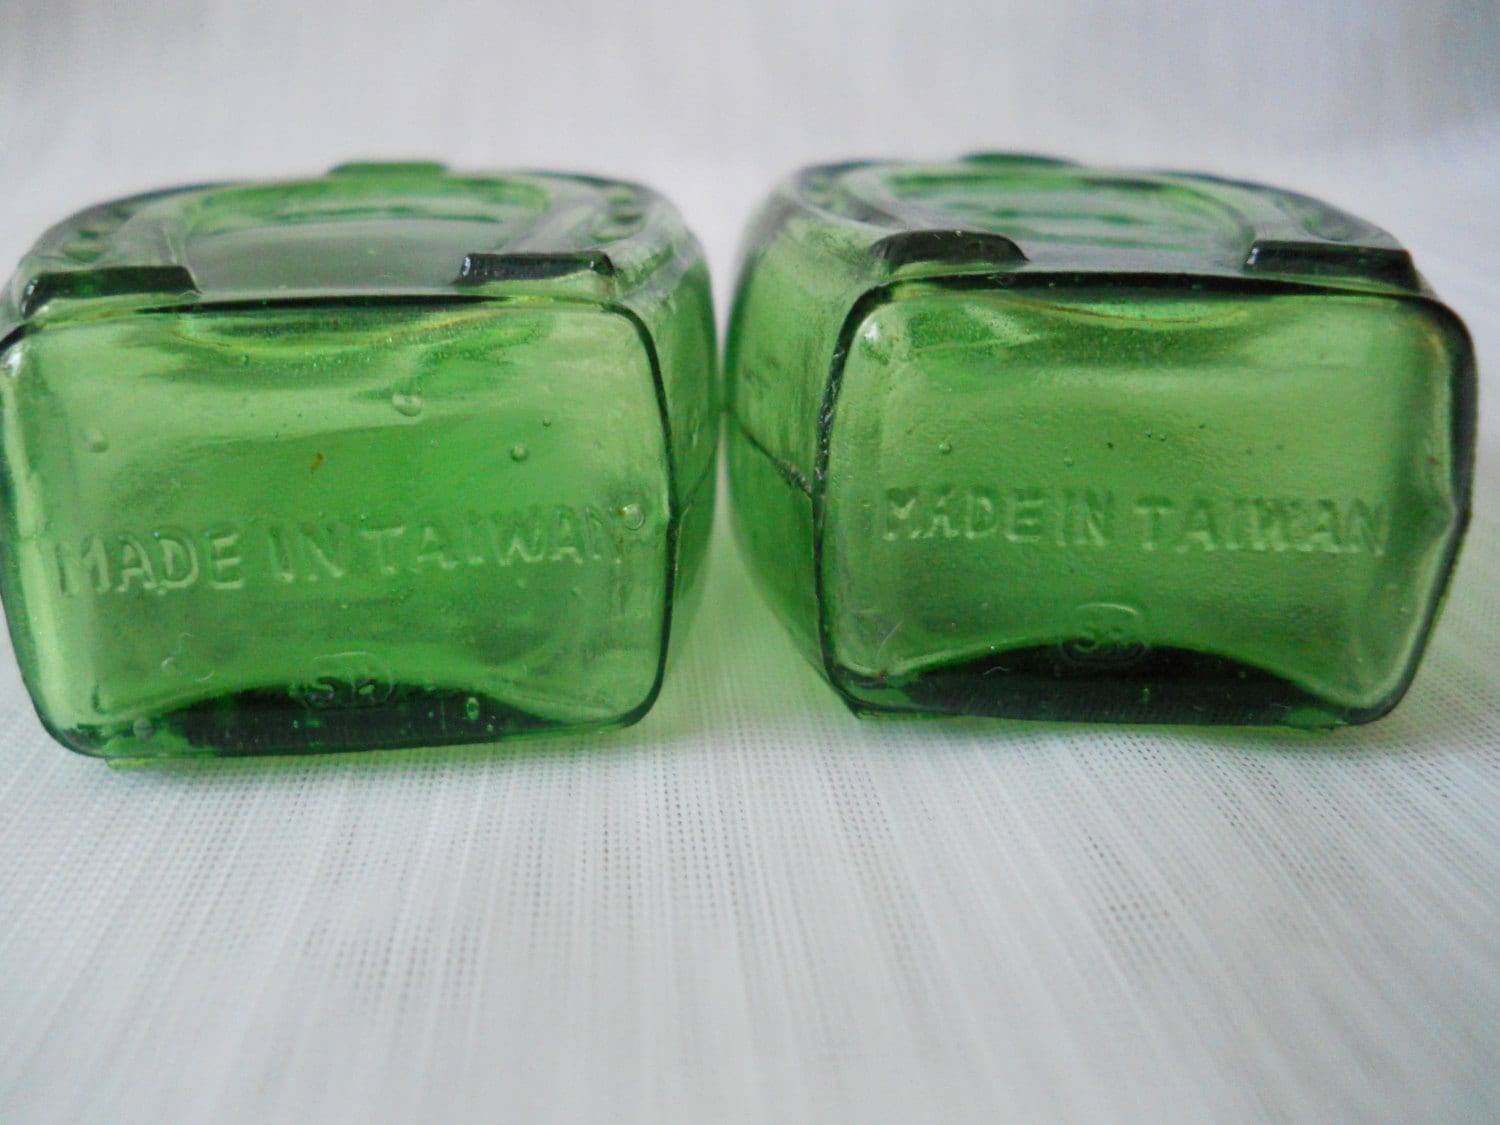 Green Bottle Salt and Pepper Shakers - Vintage, collectible, glass